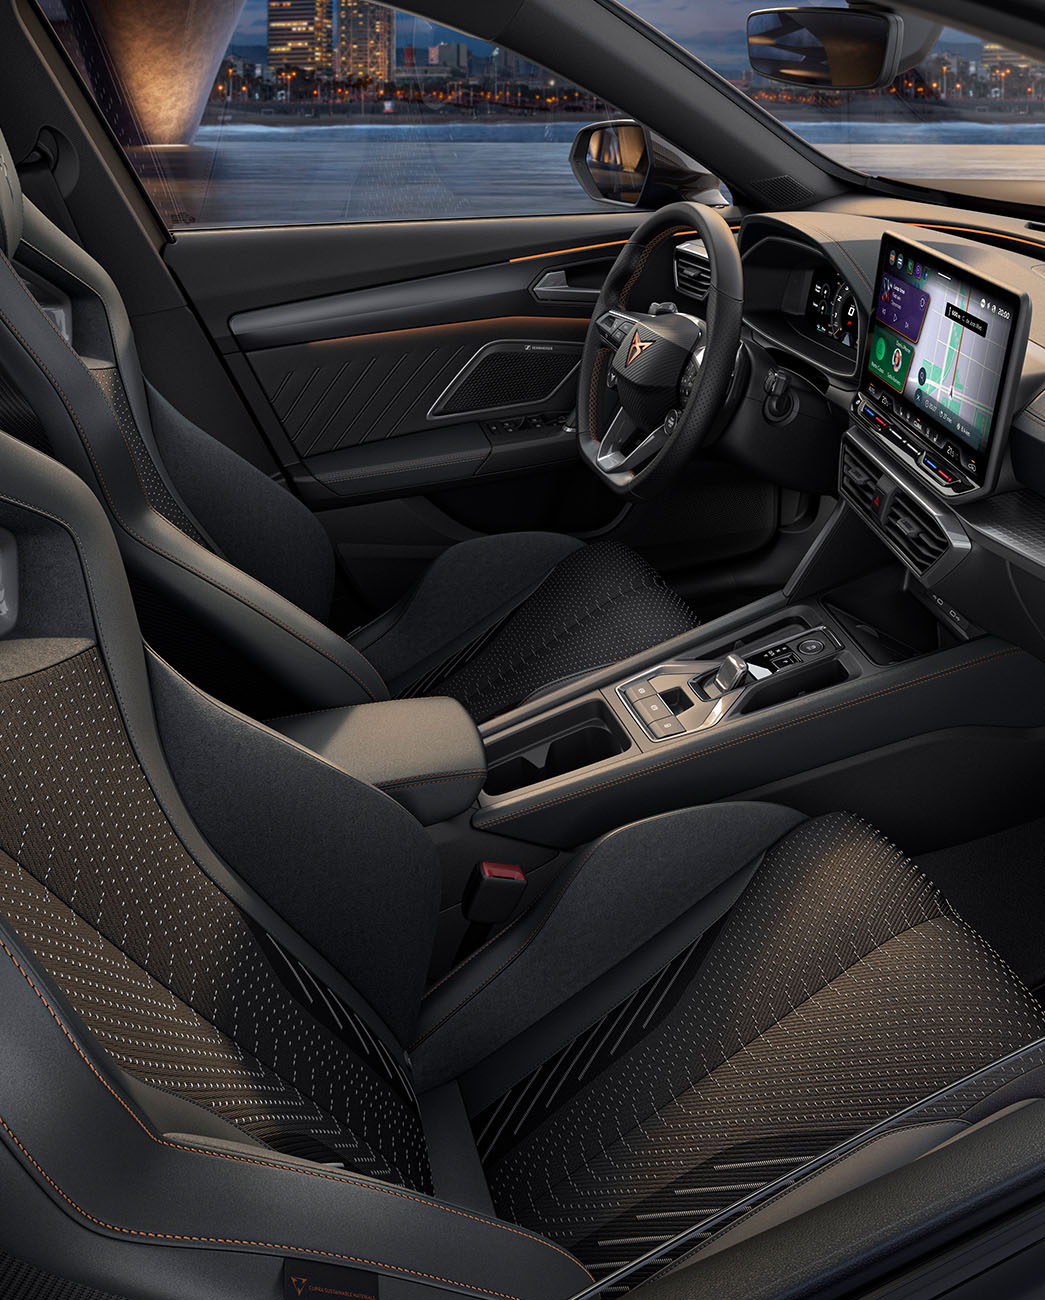 Interior view of the new CUPRA Formentor’s cockpit features black bucket seats with copper accents and stitching, complemented by an advanced infotainment system and a steering wheel featuring the CUPRA logo.